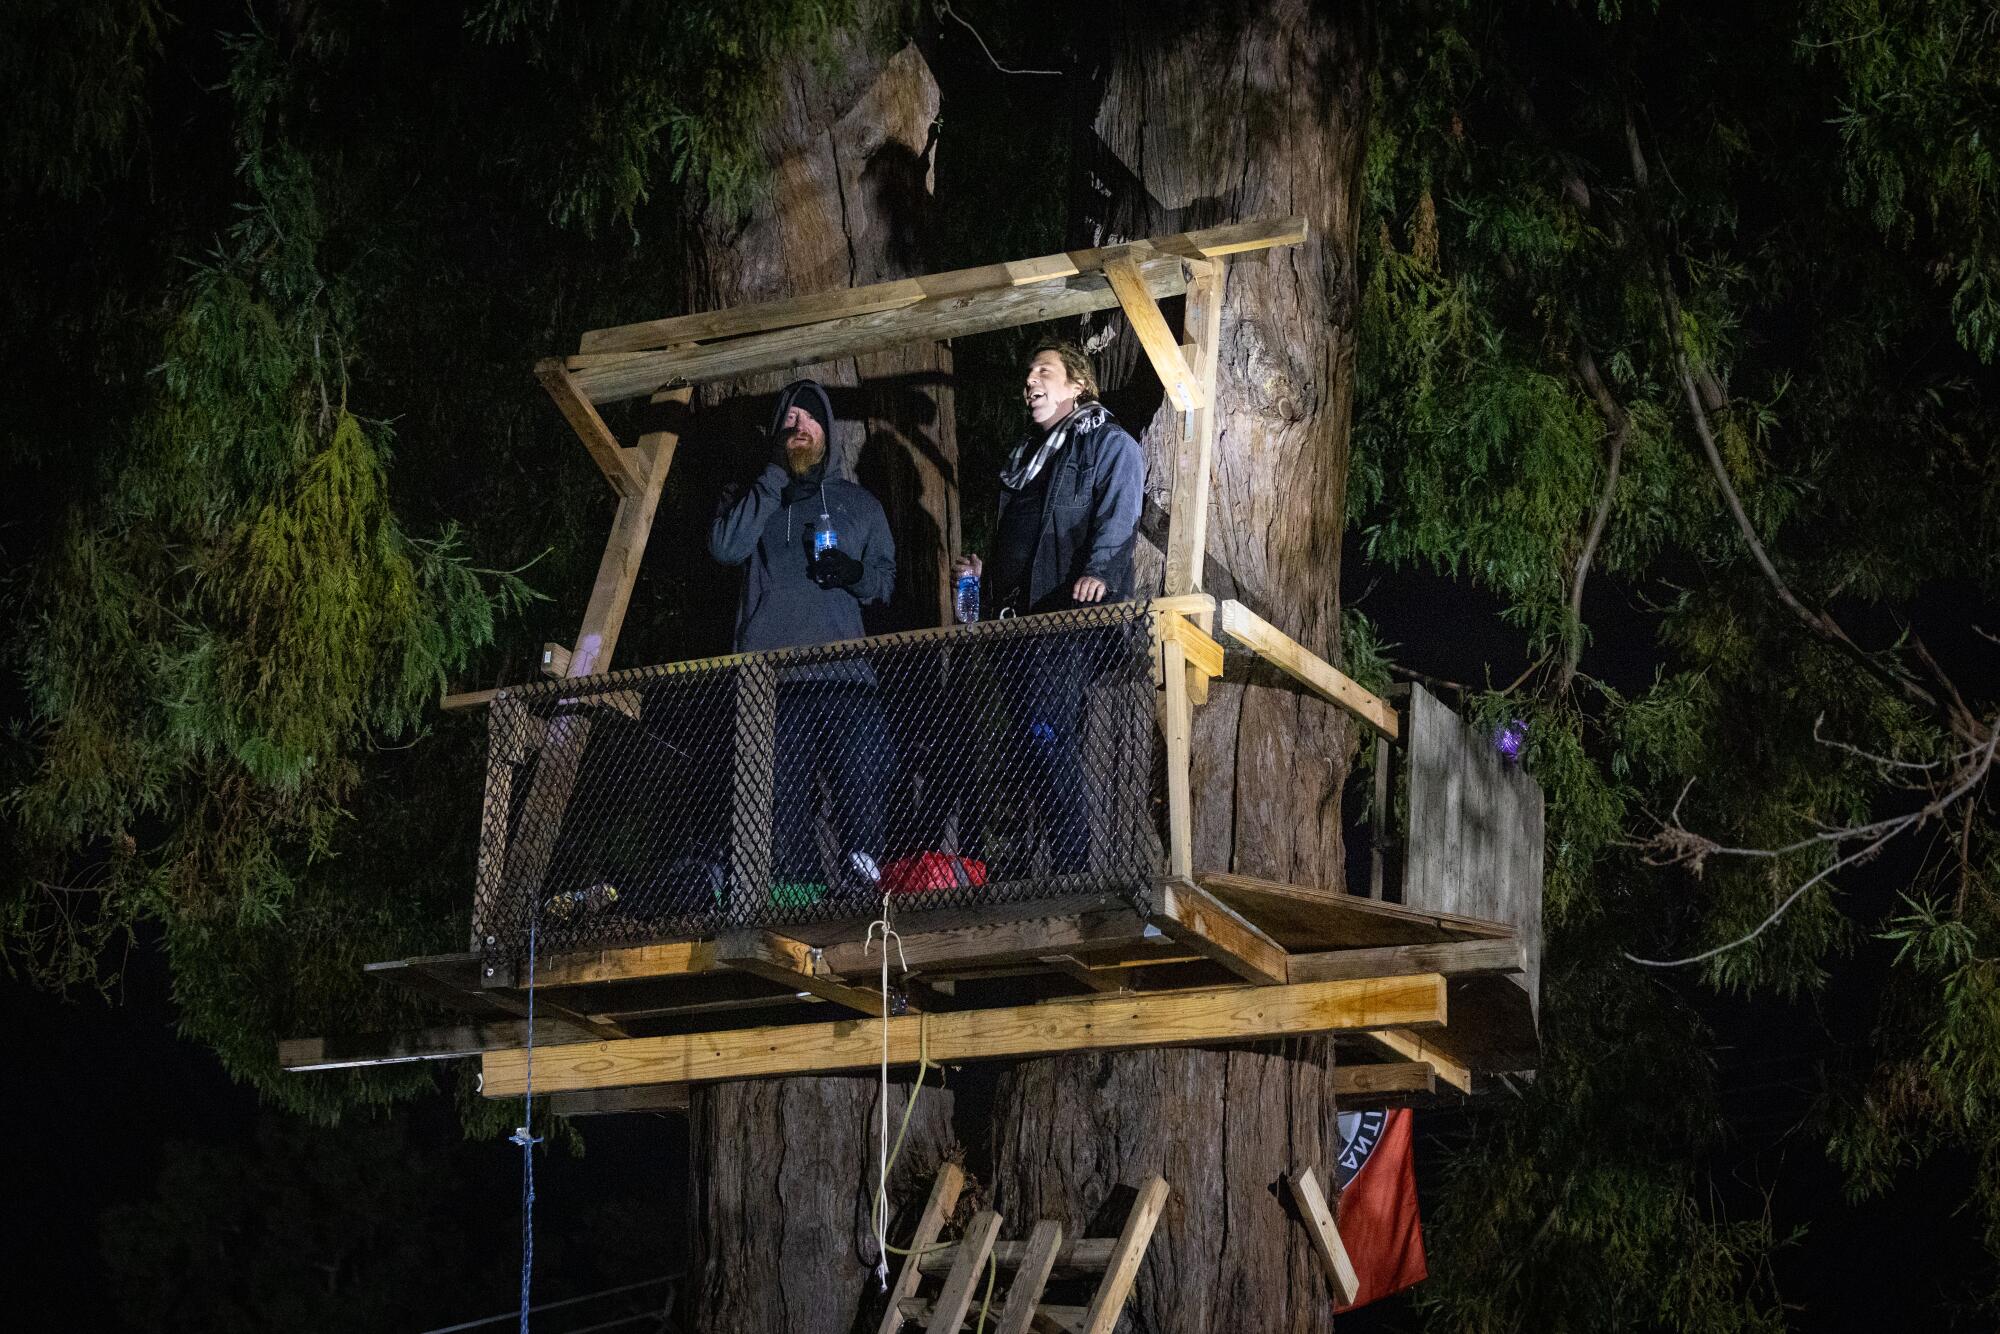 Activists refused to come down from a treehouse as authorities clear People's Park.